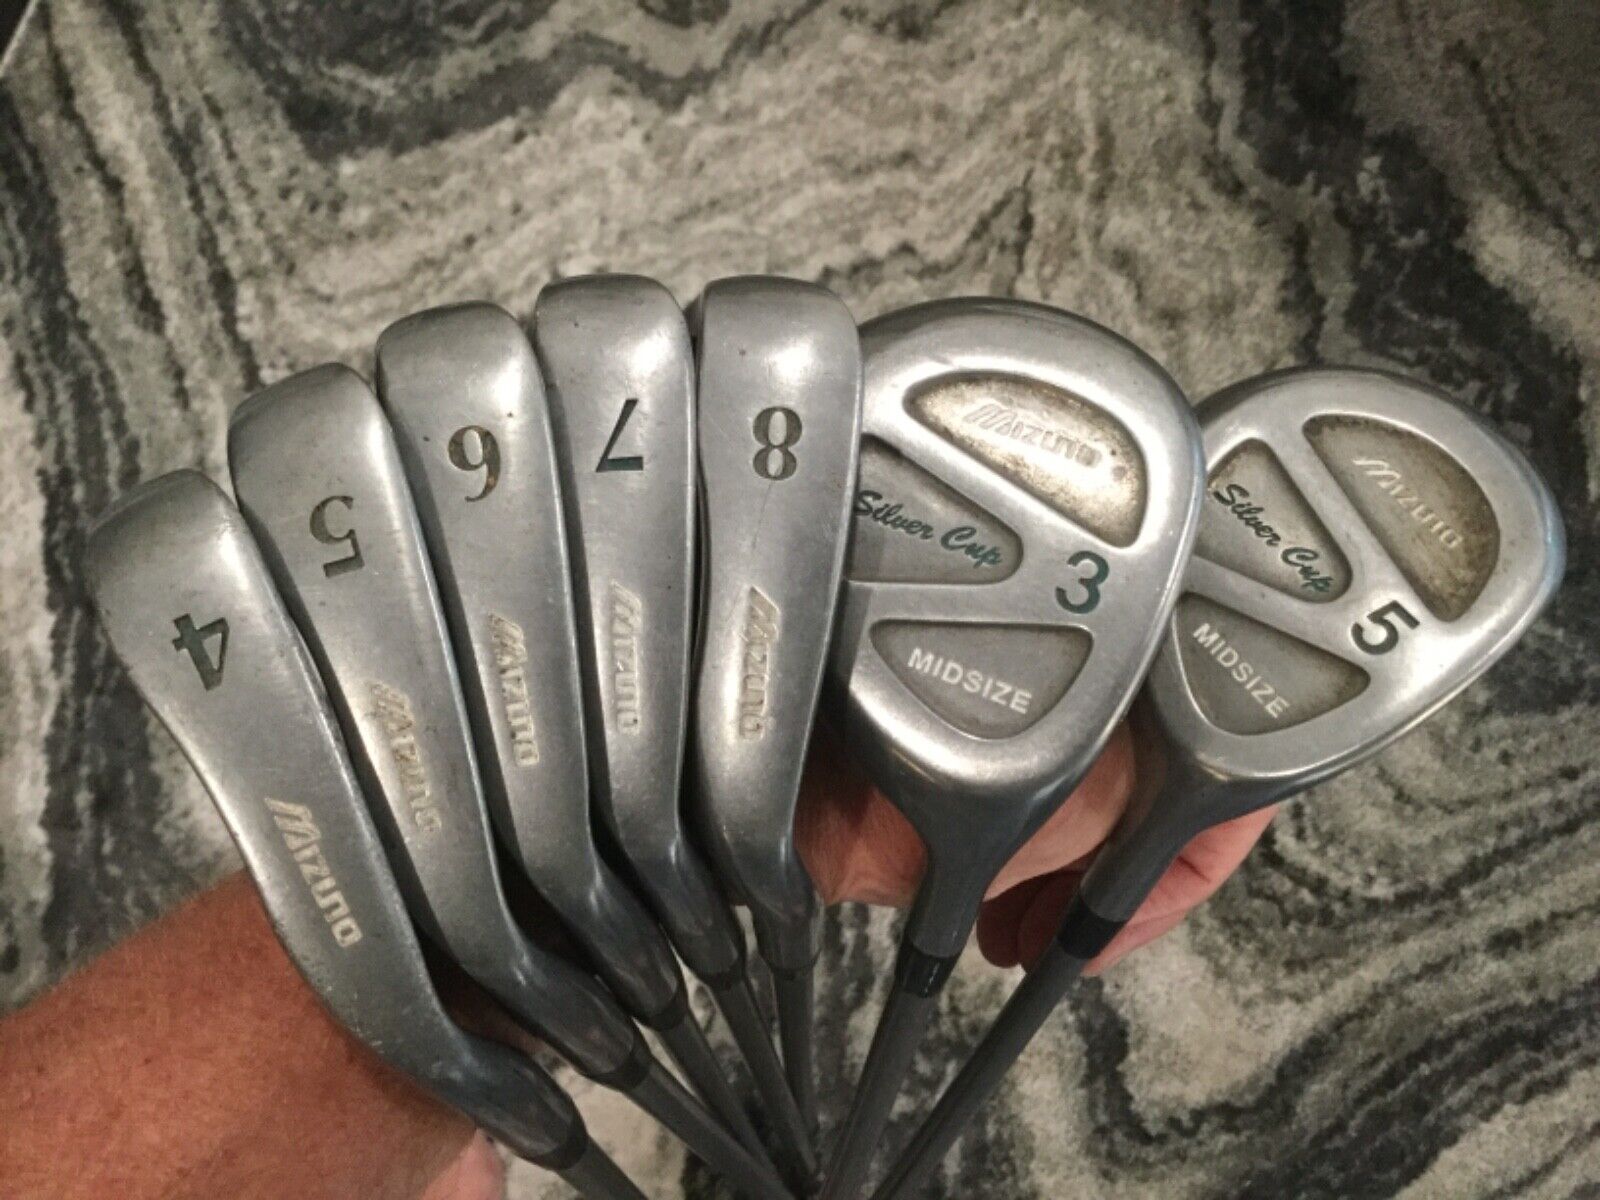 Mizuno Silver Cup 17-4 Midsize 4,5,6,7,8 Irons & 3,5 Metal Woods Graphite Shafts